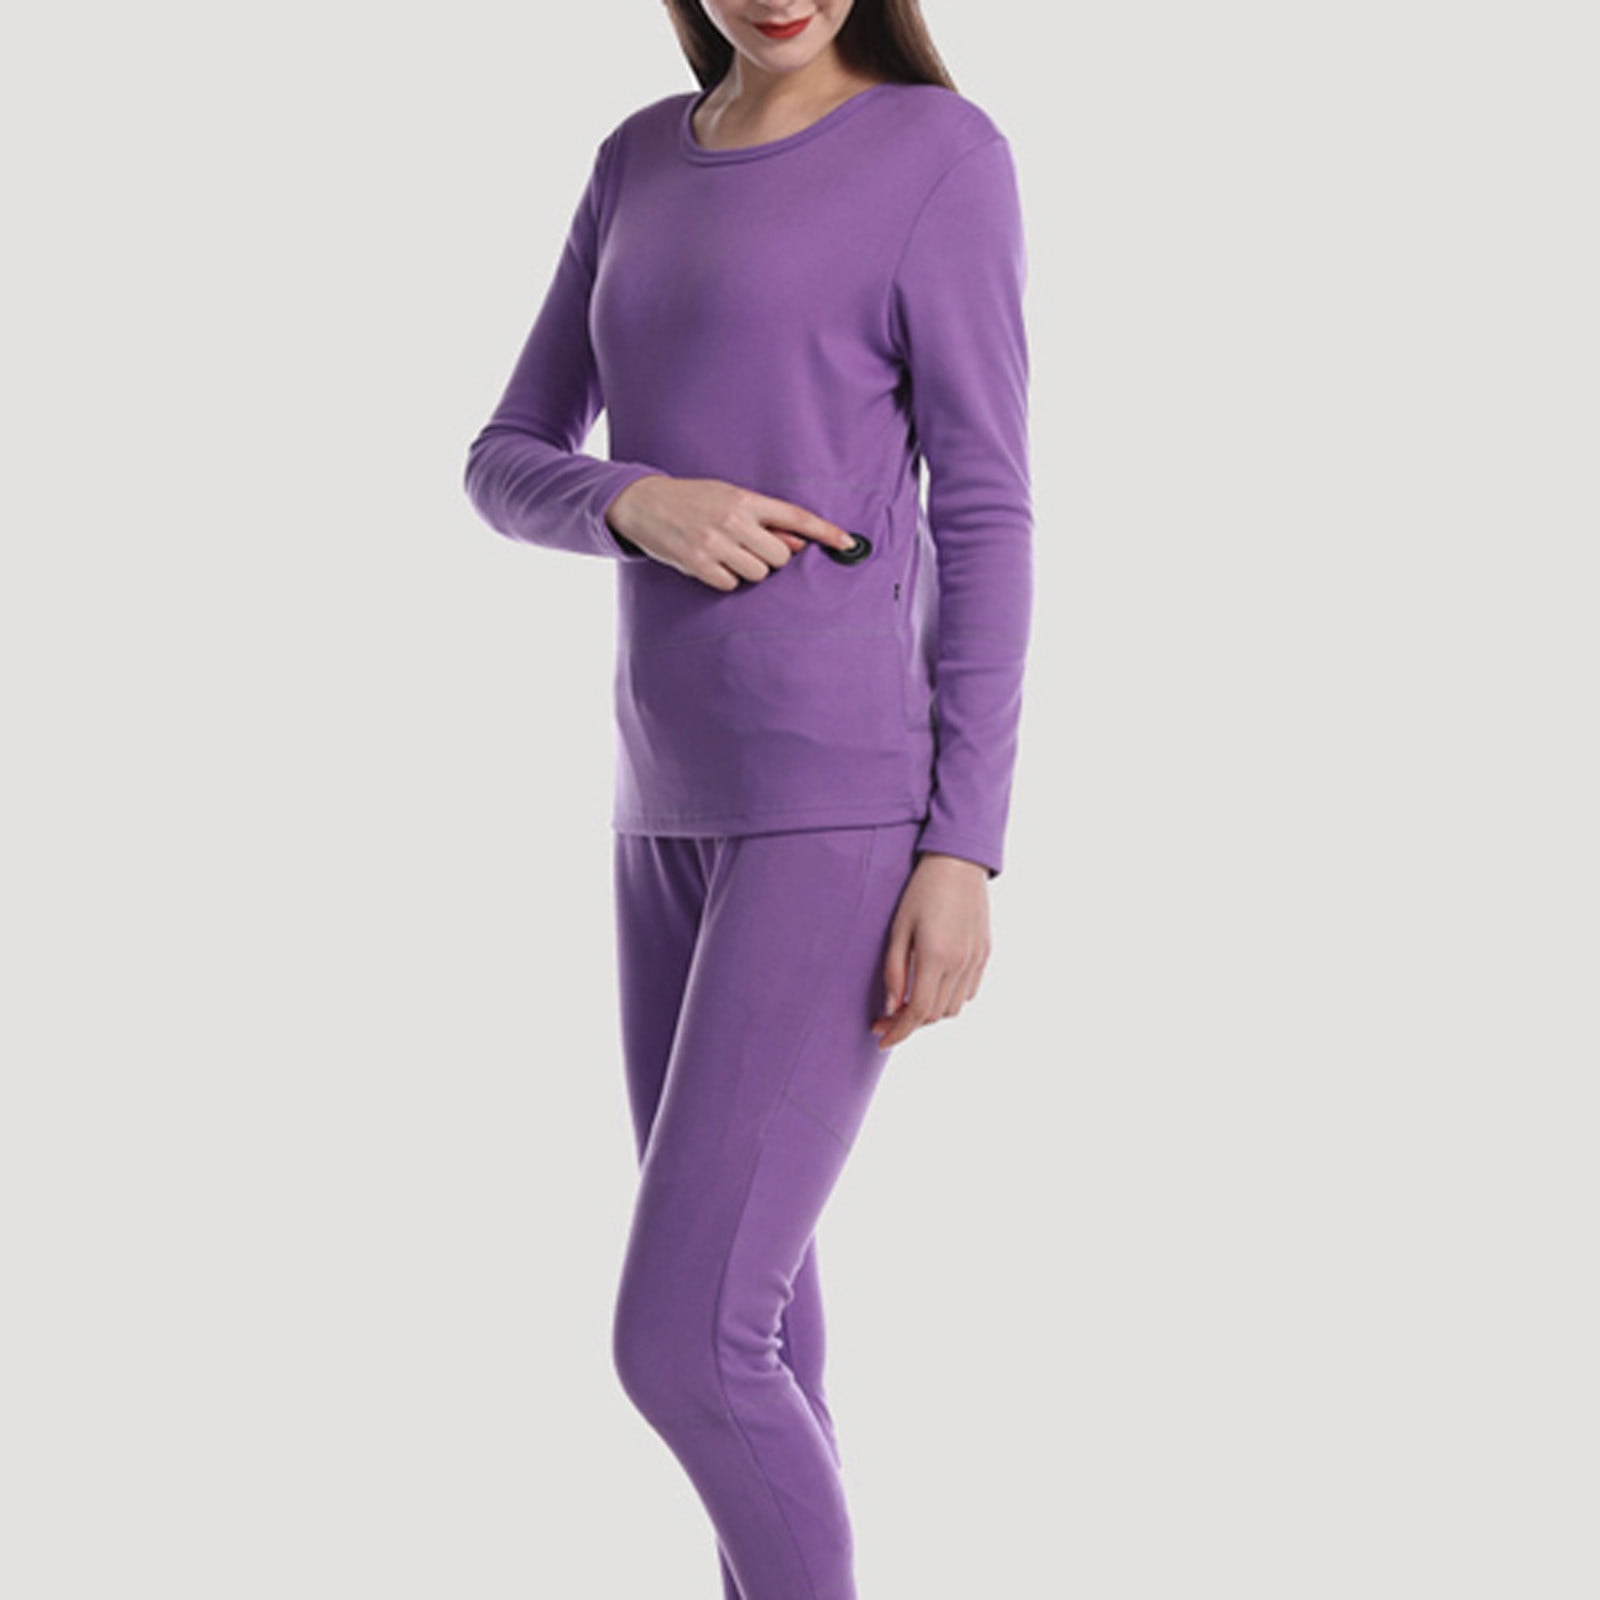 Thermal Underwear Women Men Ultra-soft Thermostatic Ultra-thin Heating  Winter Tight-fitting Base